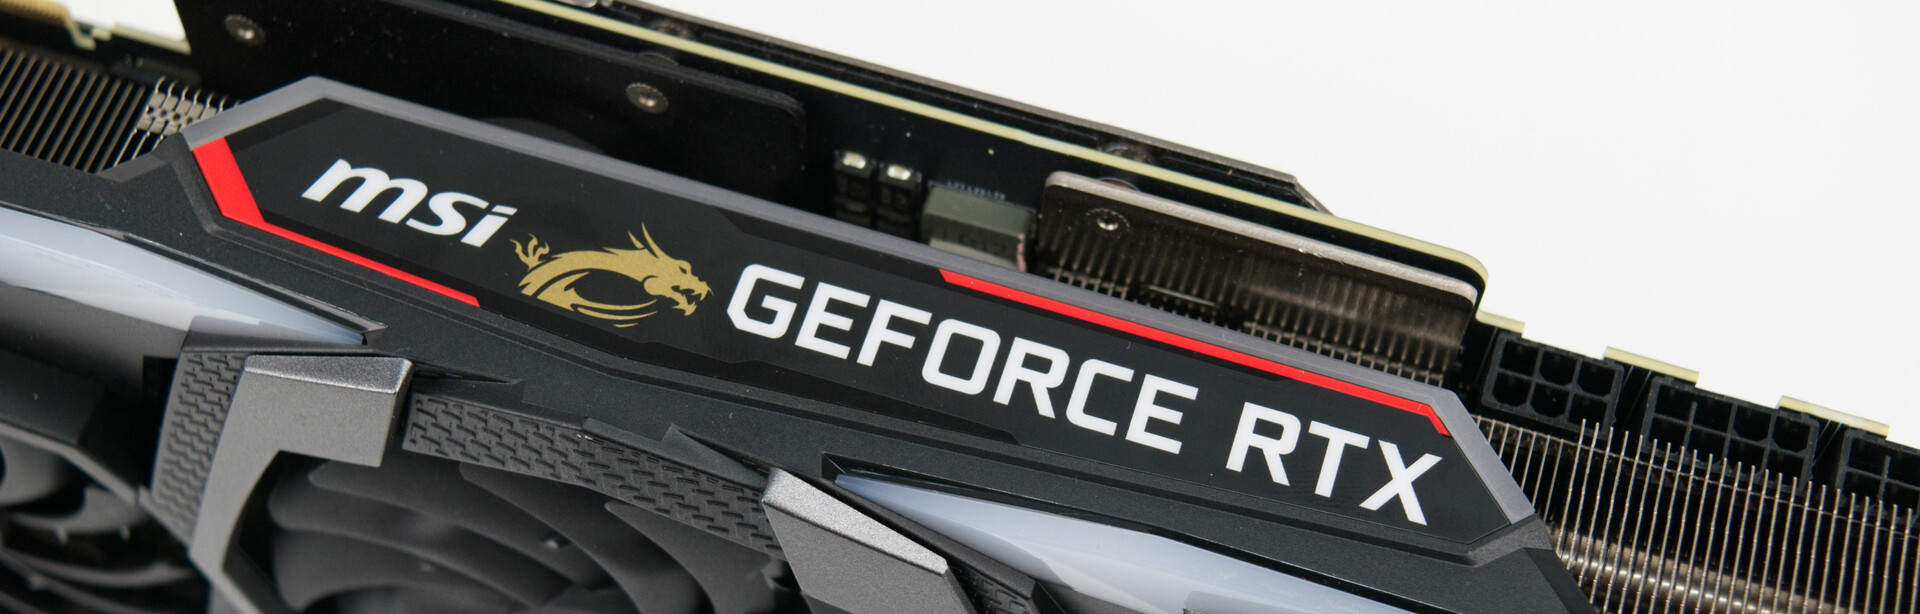 Msi Geforce Rtx 80 Ti Gaming X Trio Desktop Gpu Review The Fastest Geforce Graphics Card Around Notebookcheck Net Reviews